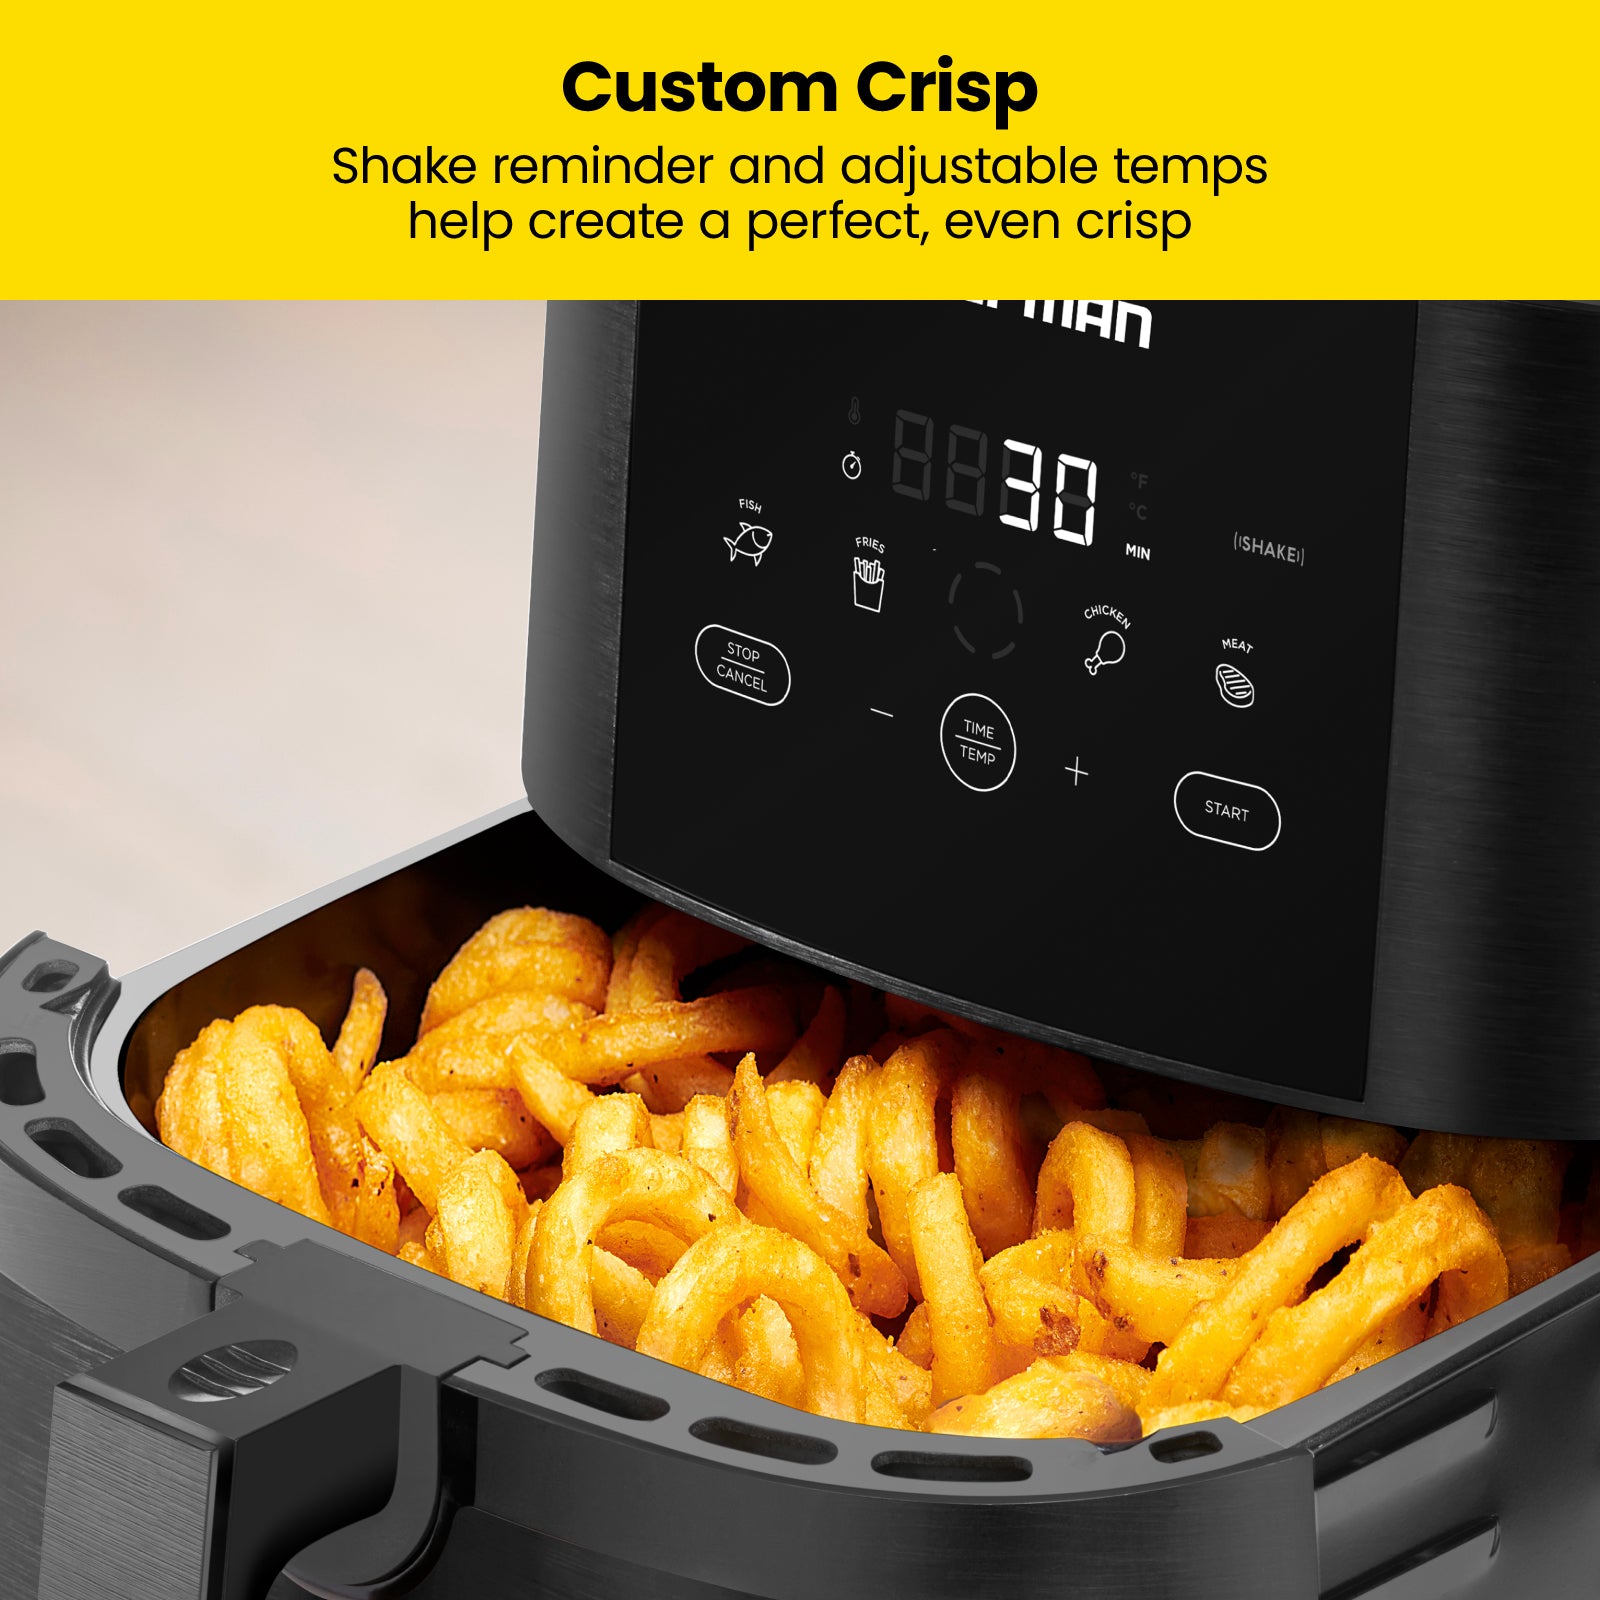 Chefman TurboFry Touch Dual Air Fryer, Maximize The Healthiest Meals With  Double Basket Capacity, One-Touch Digital Controls And Shake Reminder For